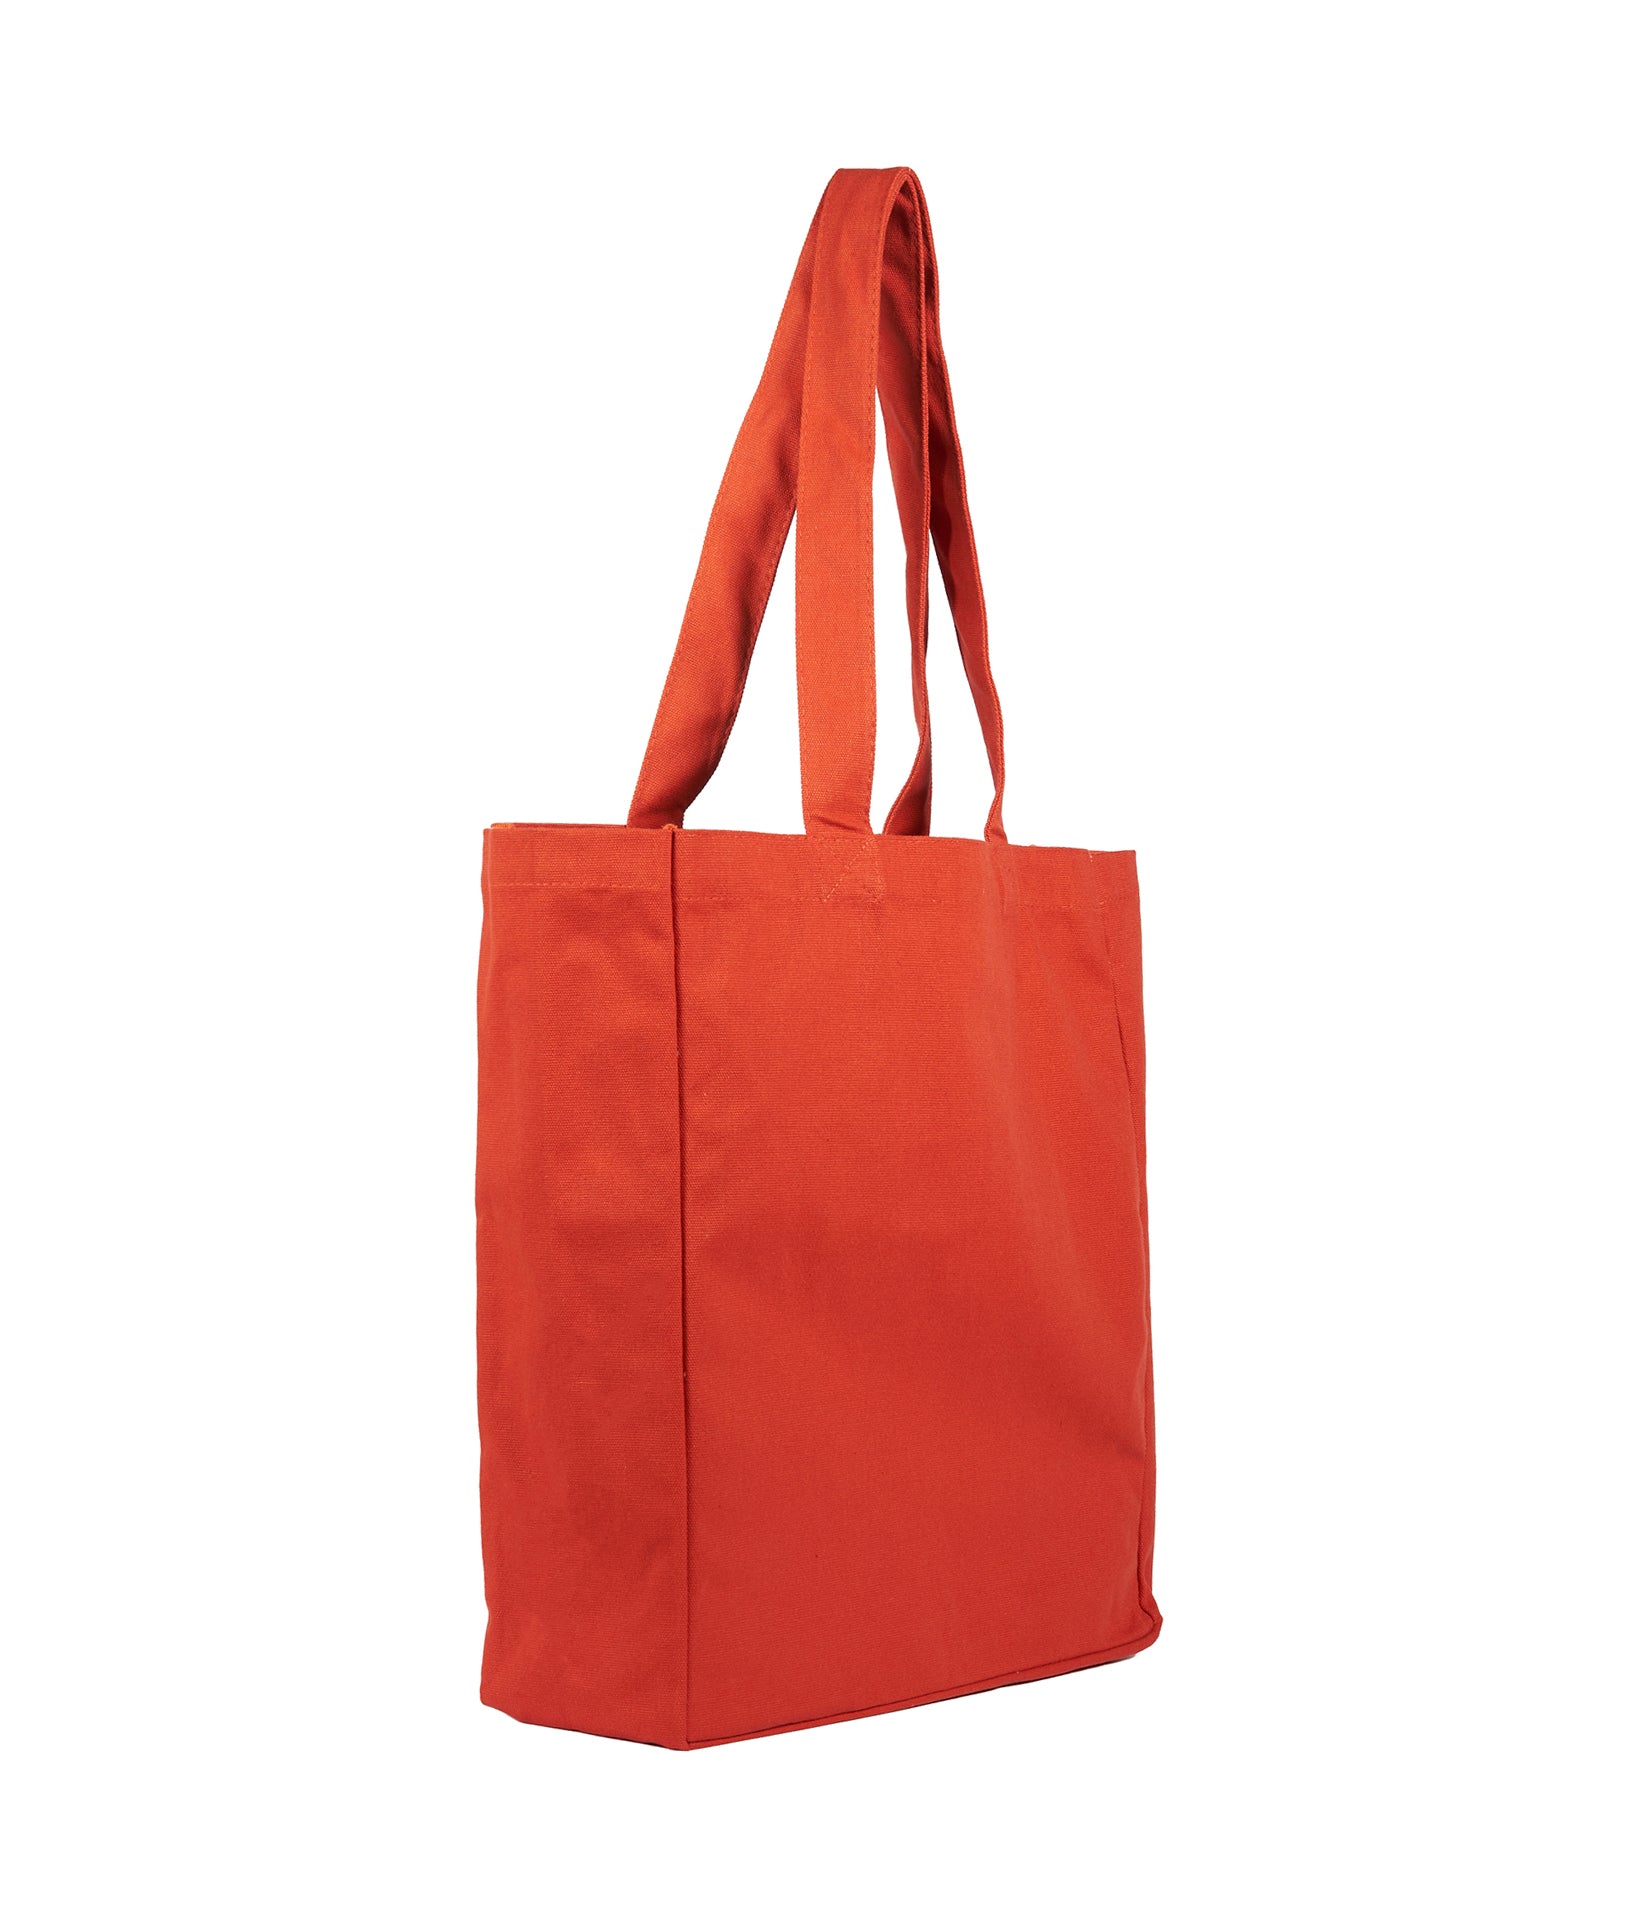 The Goods Tote